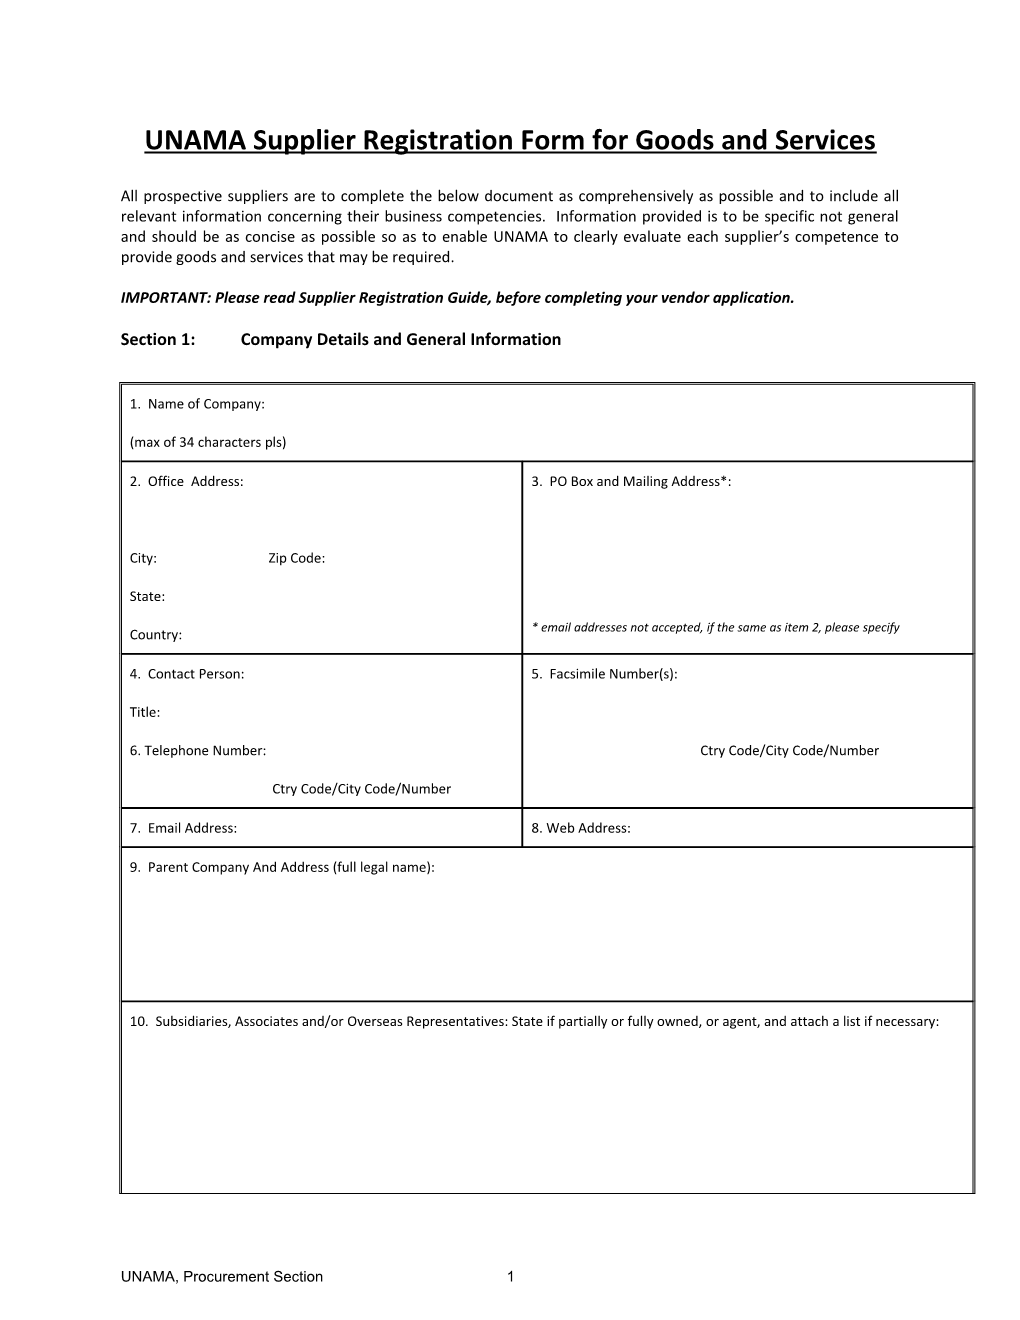 UNAMA Supplier Registration Form for Goods and Services